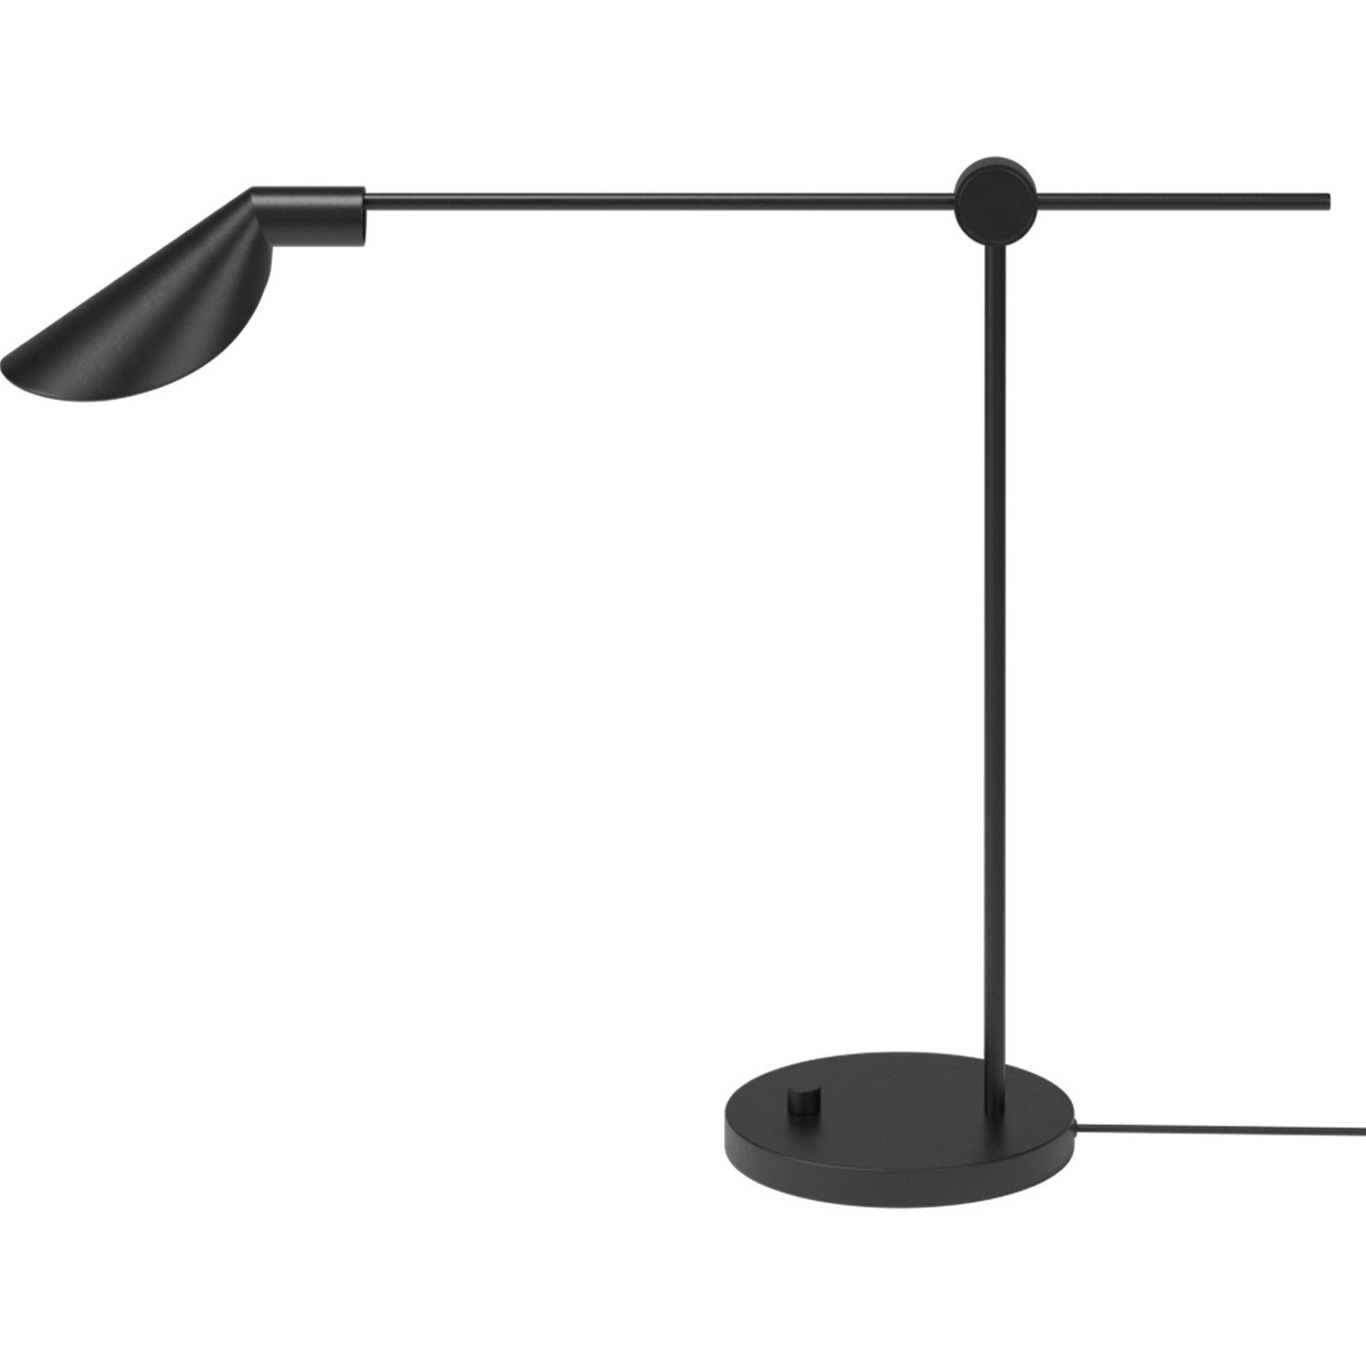 MS021 Table Lamp, Black Pvd